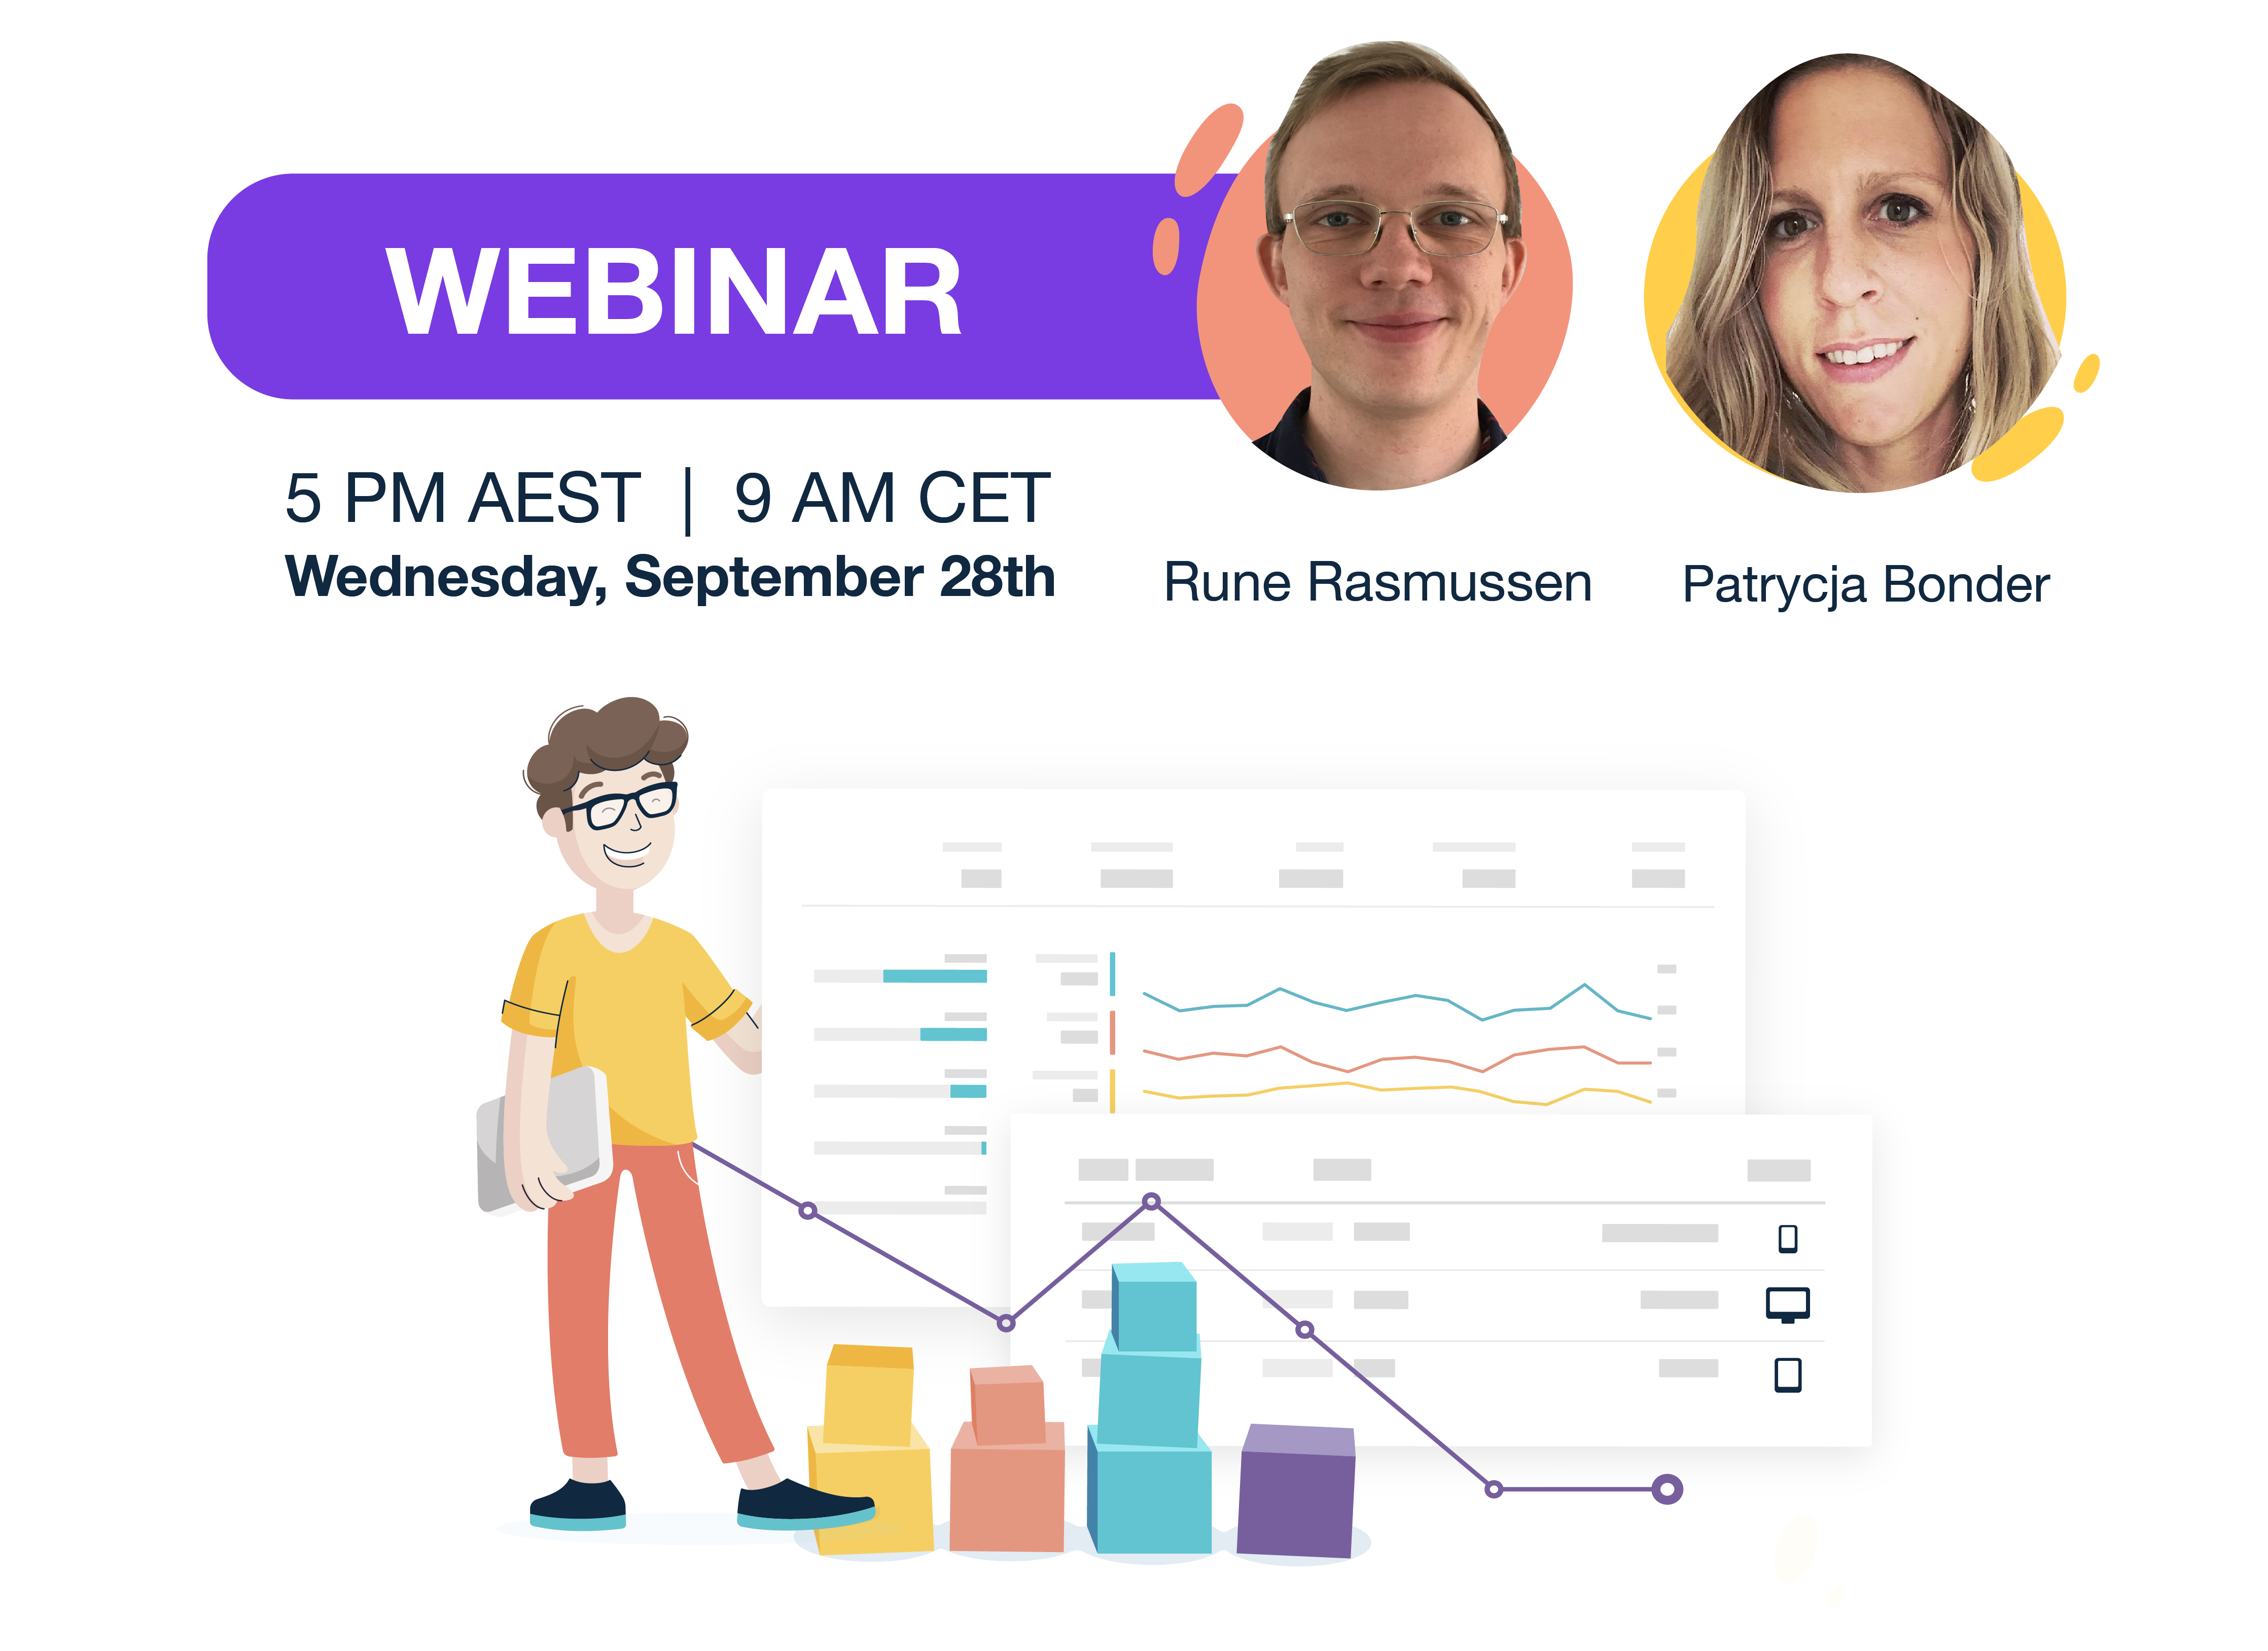 Banner with the text: "WEBINAR, Wednesday, September 28th  5pm AEST/9am CEST". The banner also has headshots showing the presenters with their names "Rune Rasmussen" and "Patrycja Bonder" below. The banner also has an illustration of a person with glasses standing next to the Monsido platform.